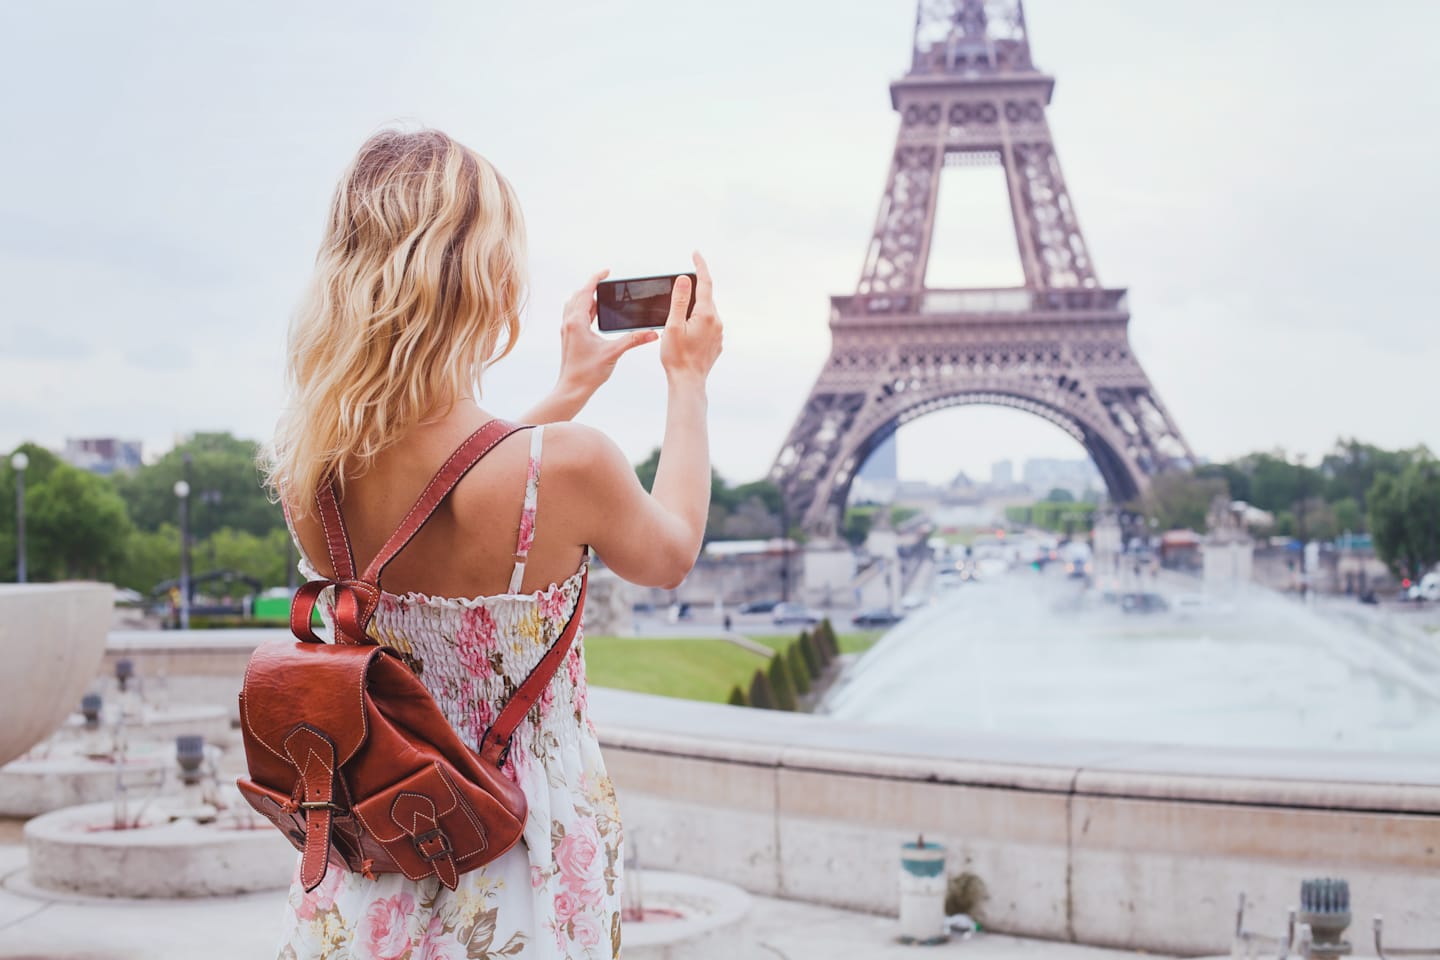 Woman taking photo at Eiffel Tower.